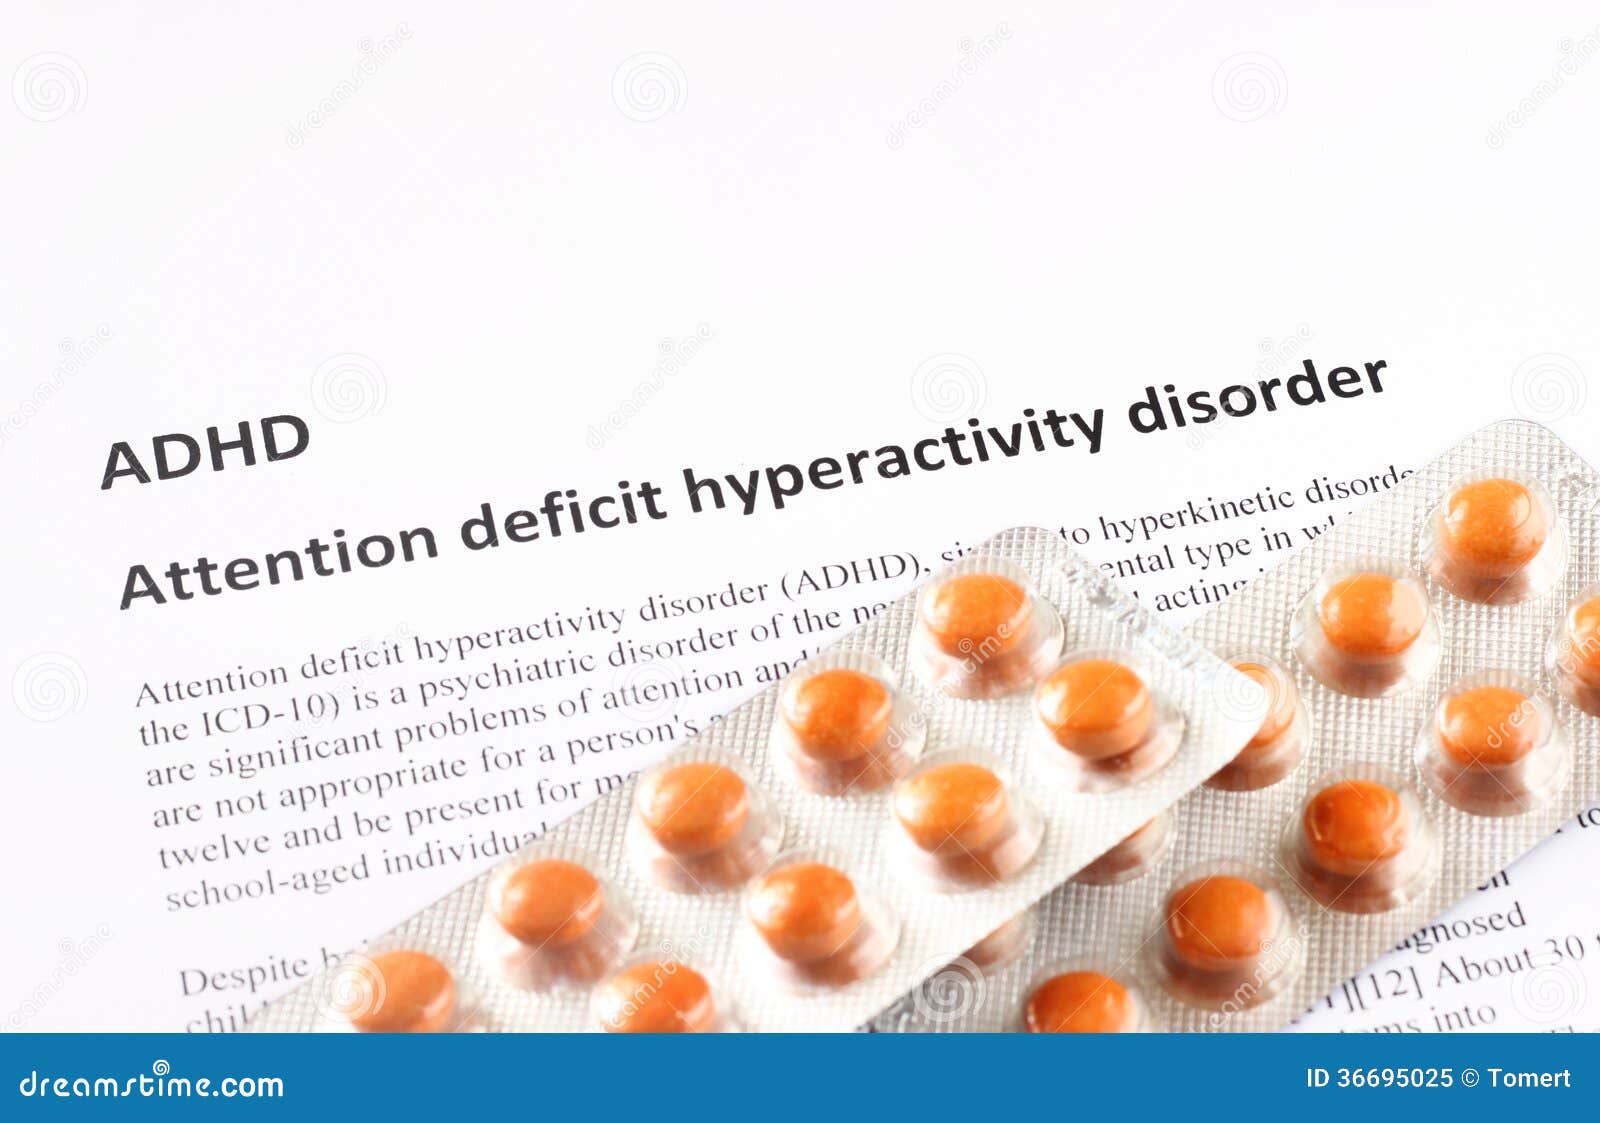 Introduction To Attention Deficit Hyperactivity Disorder (ADHD)